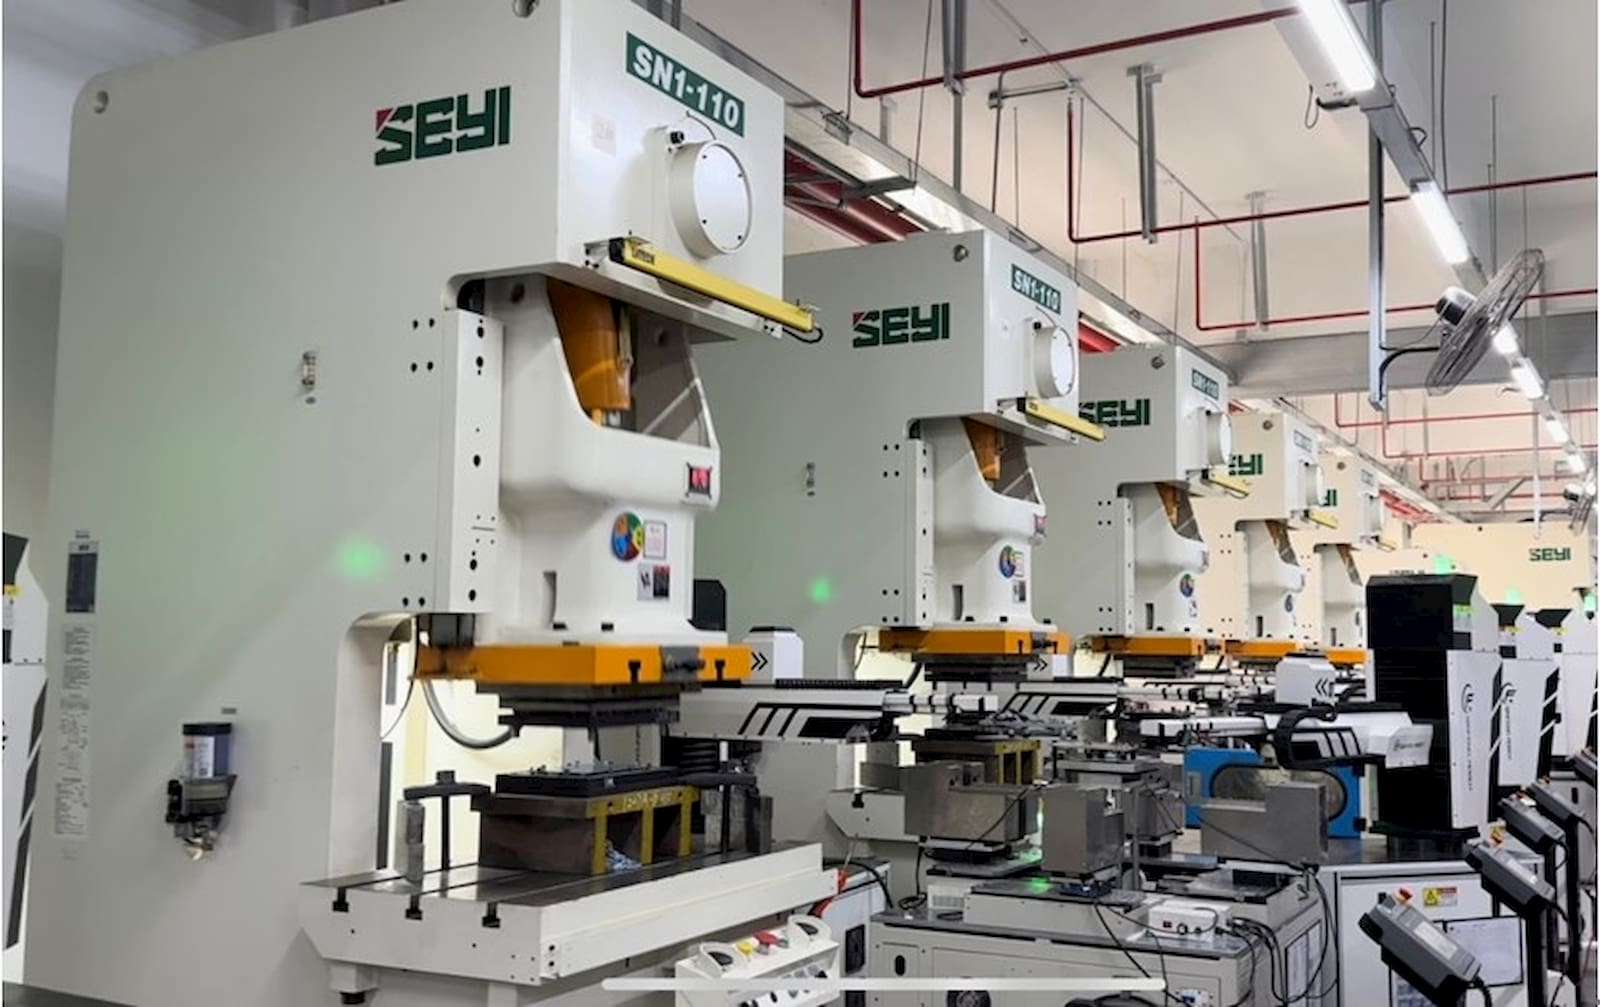 Suzhou SHARE WELL has partnered with Wancheng Precision Electronics to establish Suzhou CHENG WELL Precision Technology, jointly building a sustainable supply chain for metal stamping.